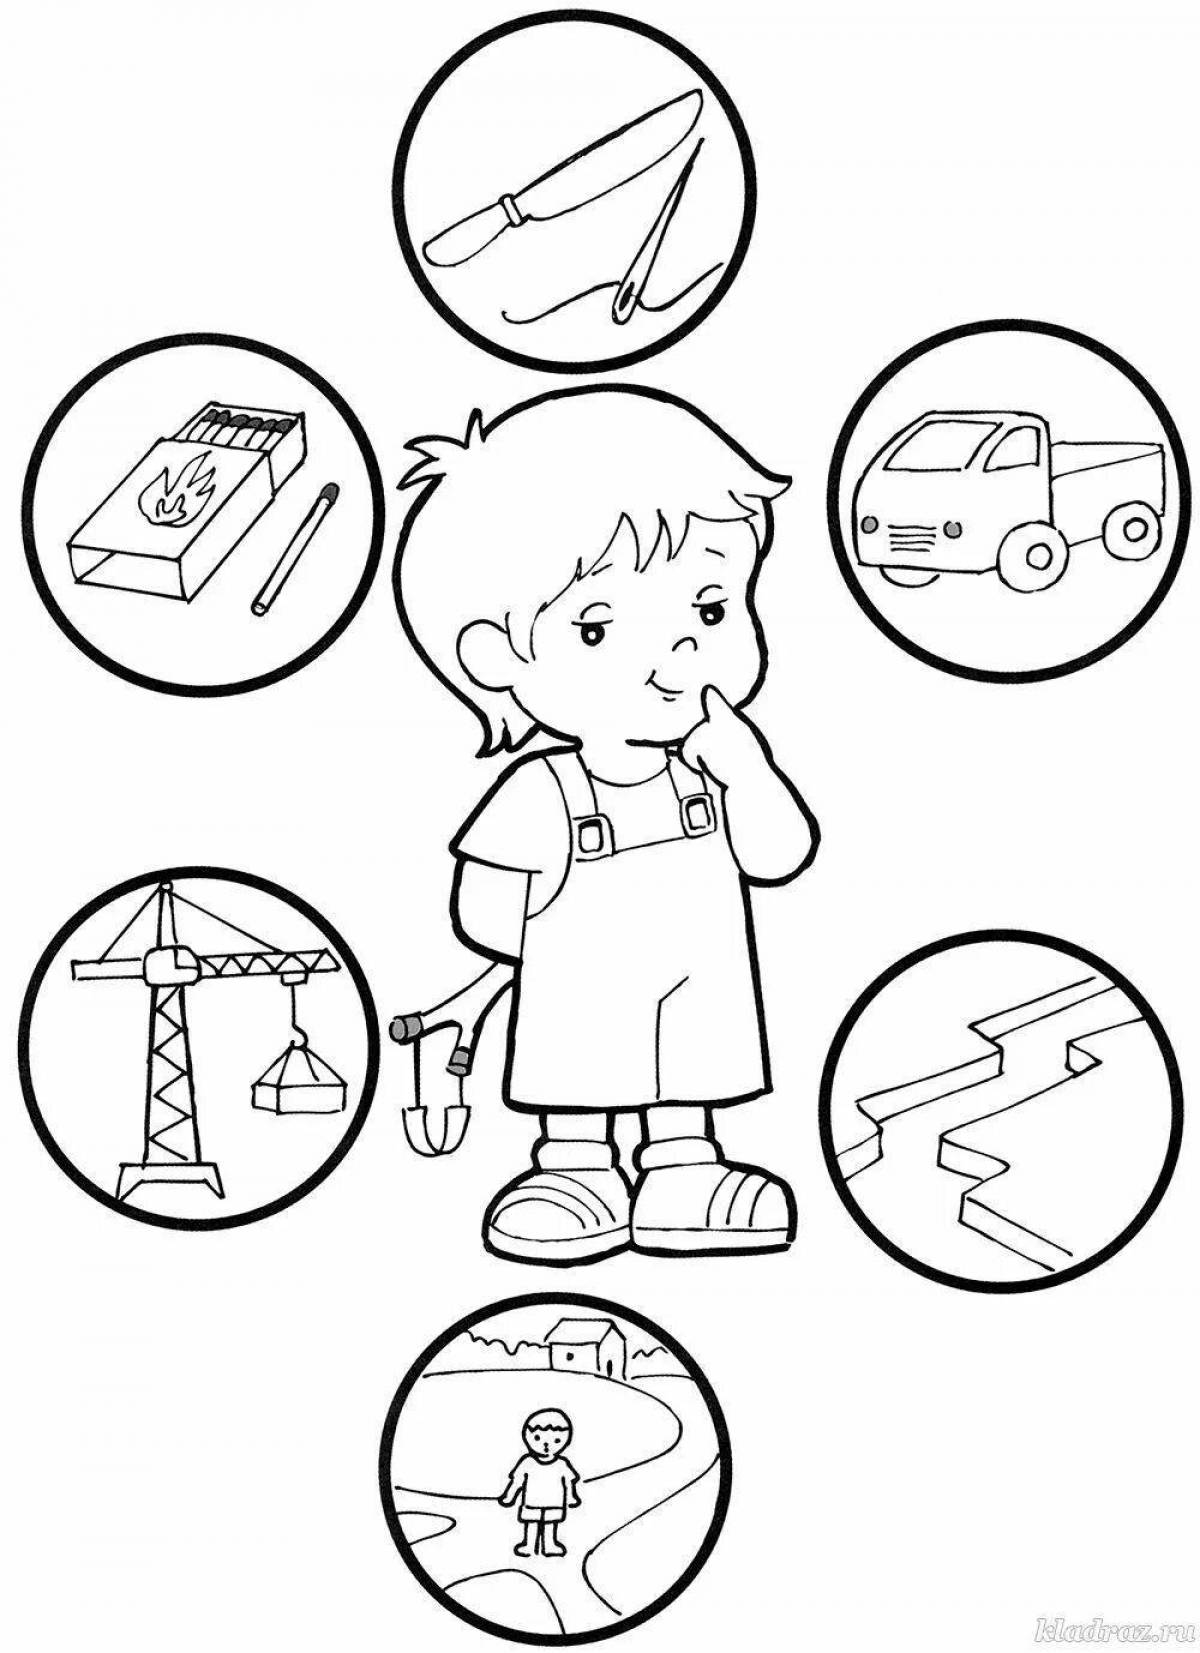 Glamorous fire safety signs coloring page